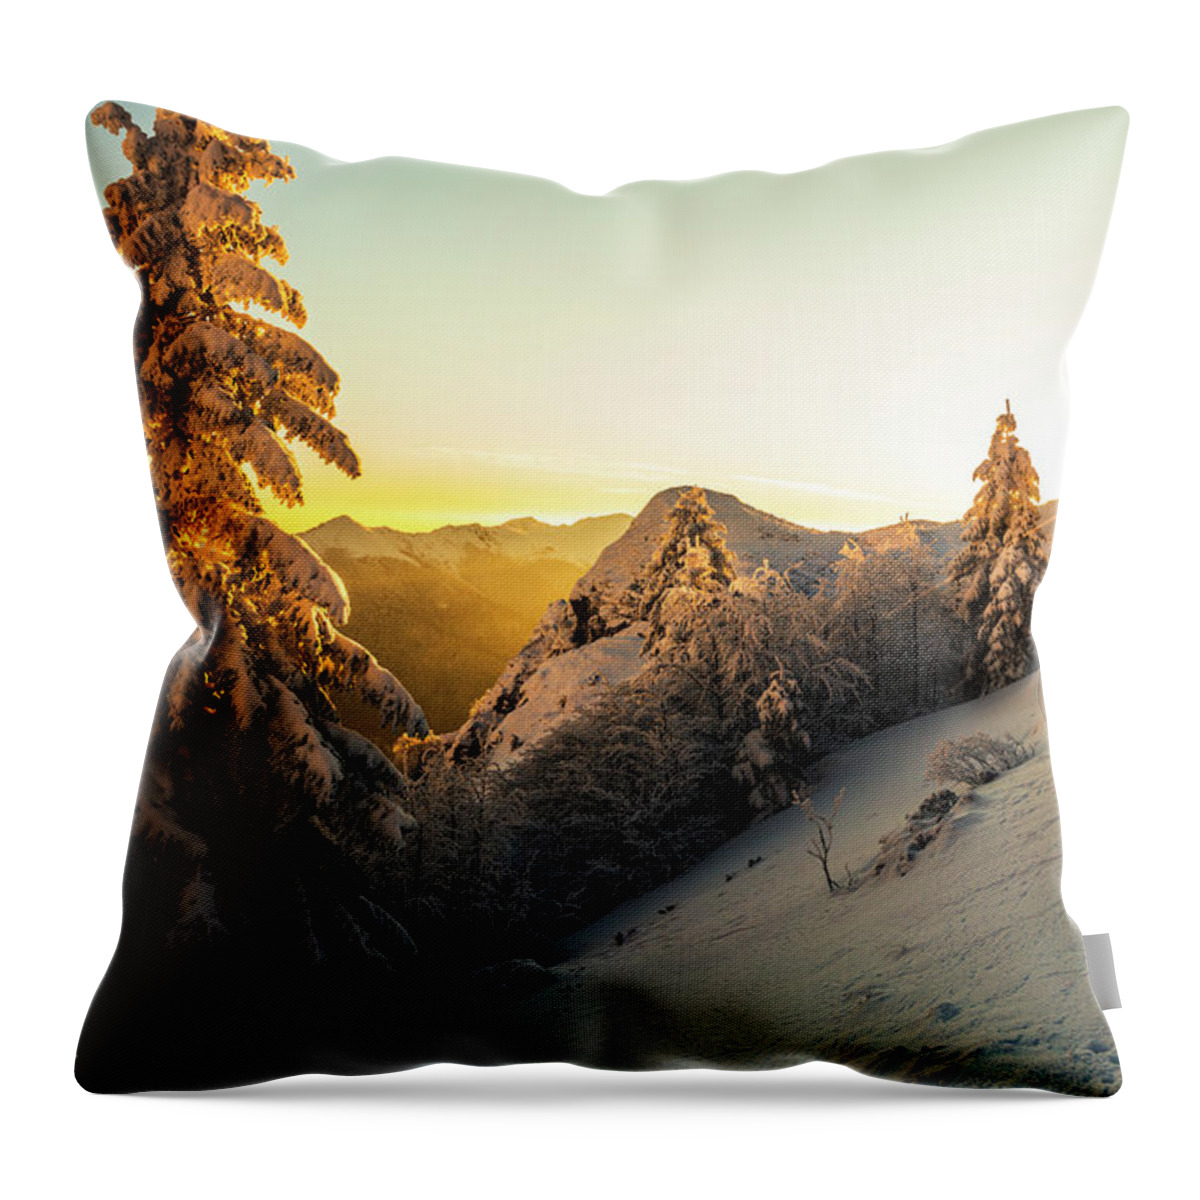 Balkan Mountains Throw Pillow featuring the photograph Golden Winter by Evgeni Dinev